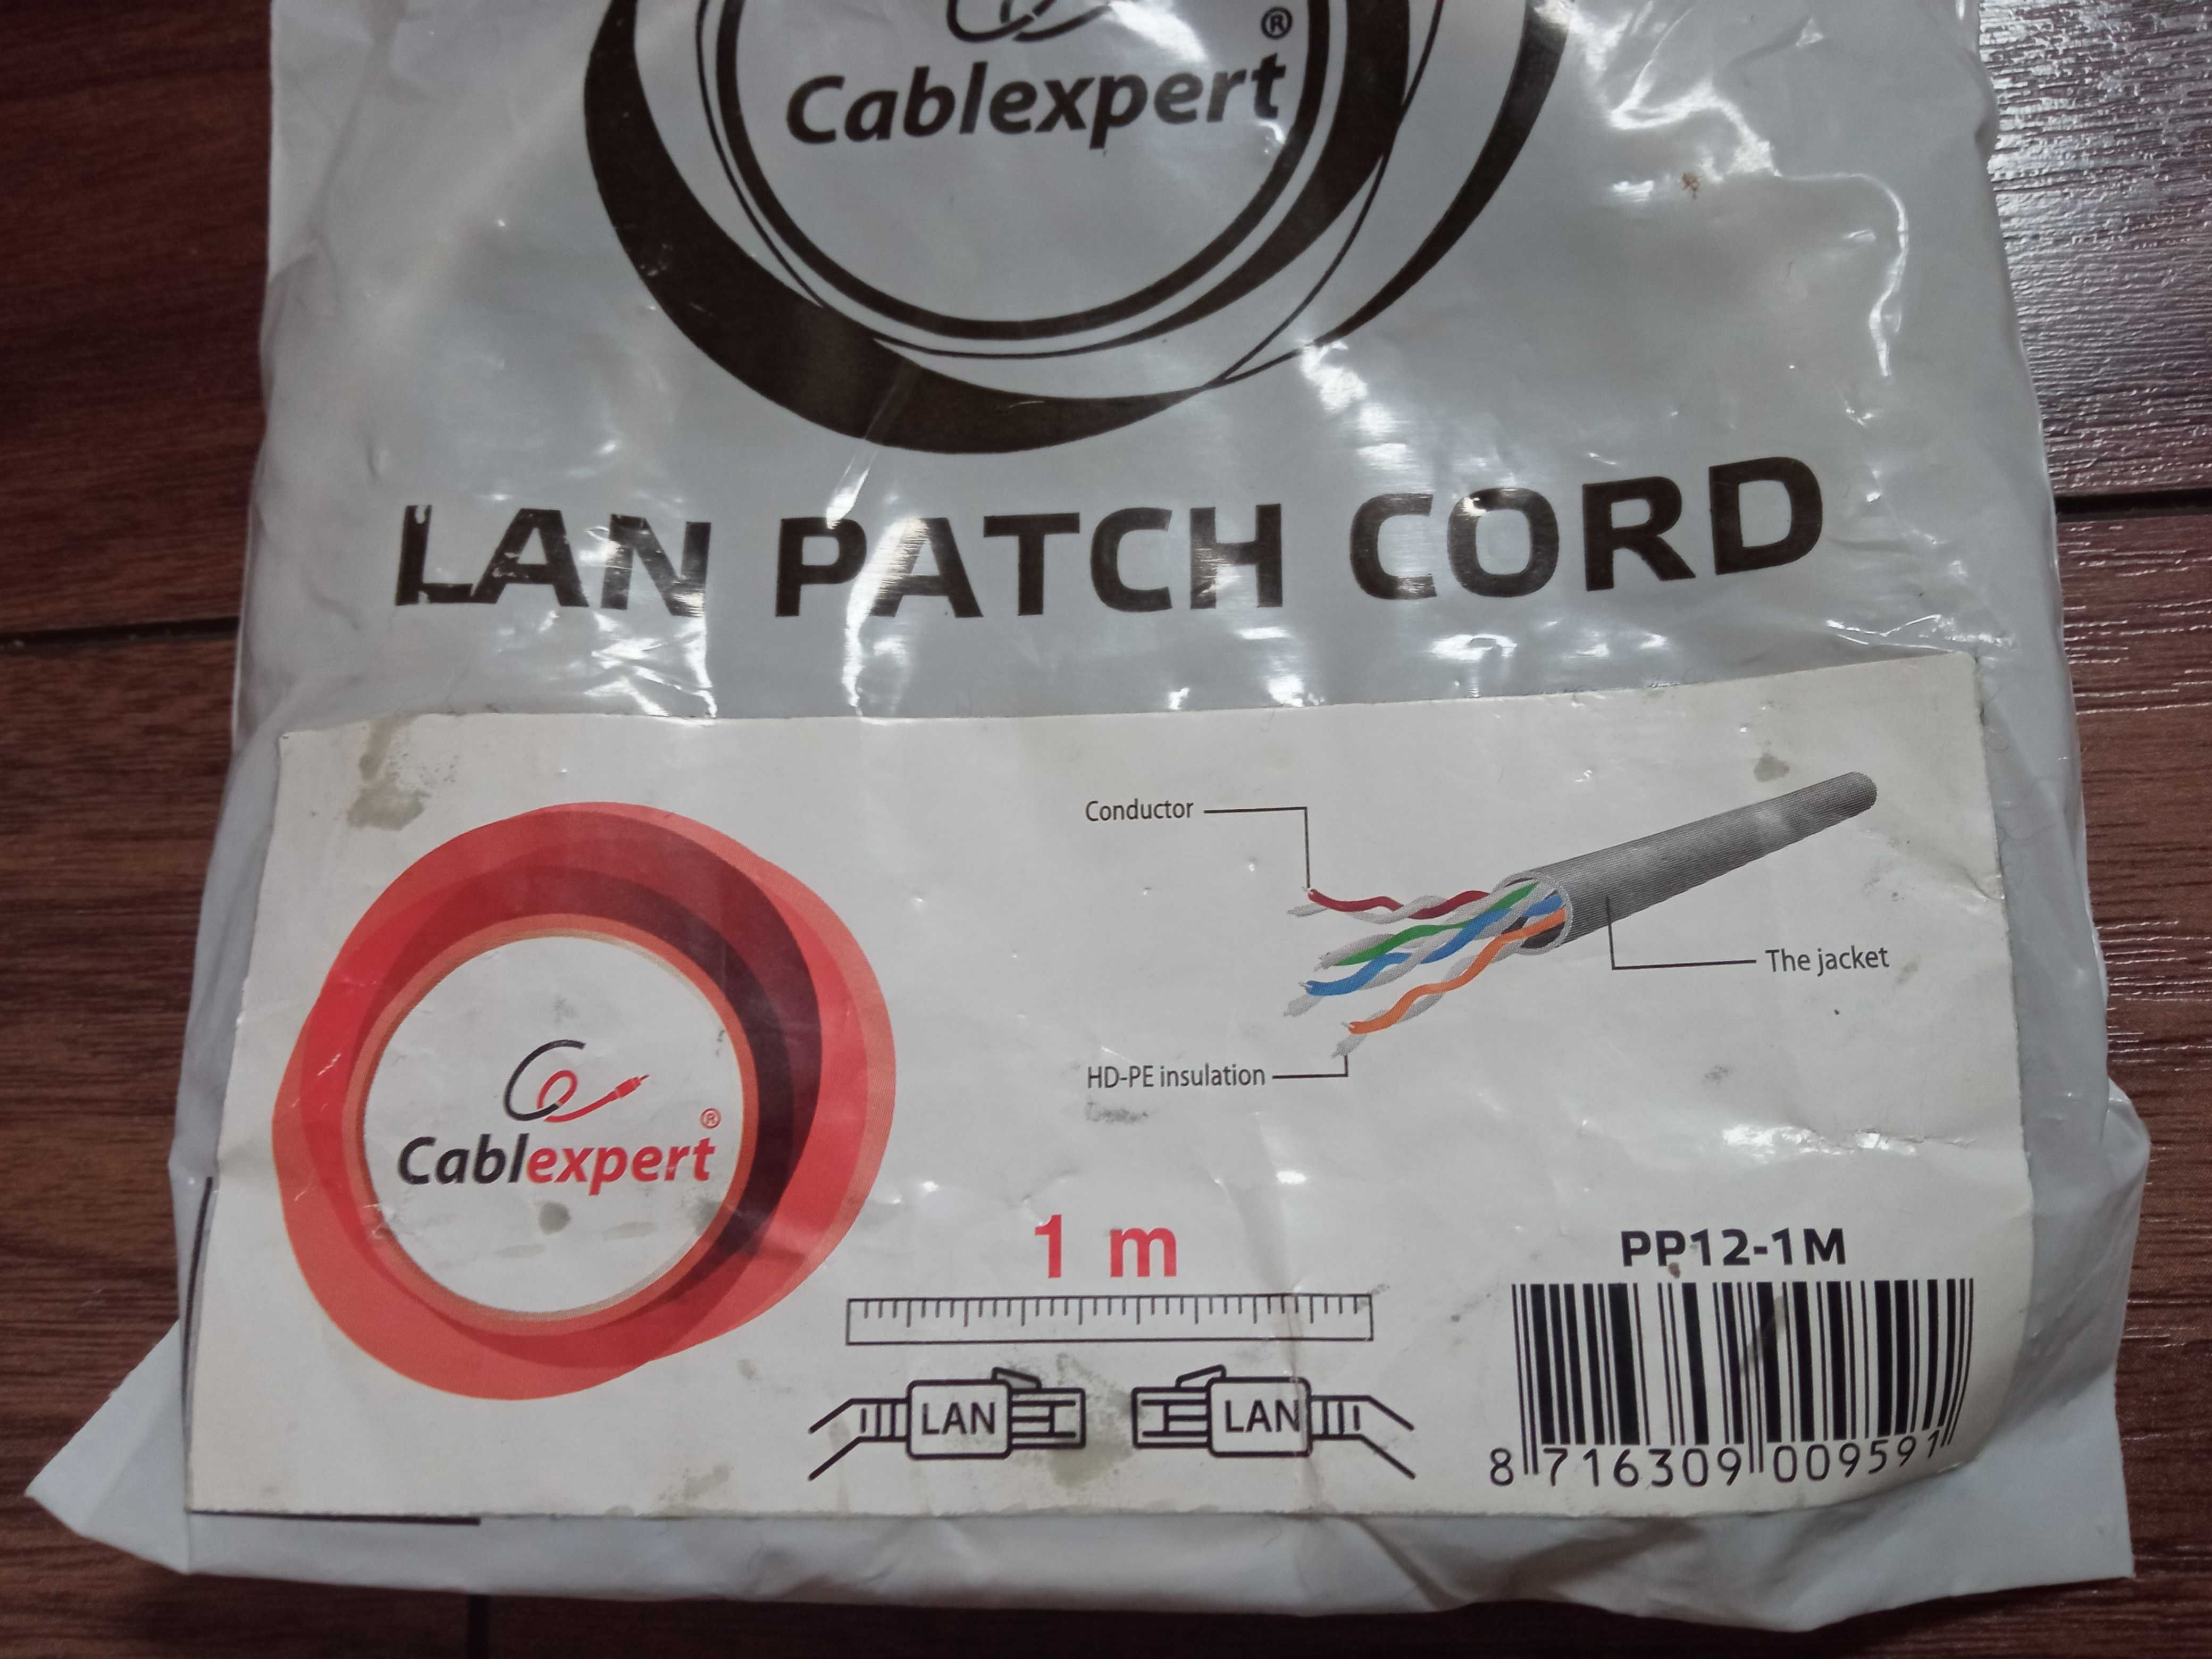 Nowy kabel Lan Patch Cord Cablexpert 1 m szary 5E UTP